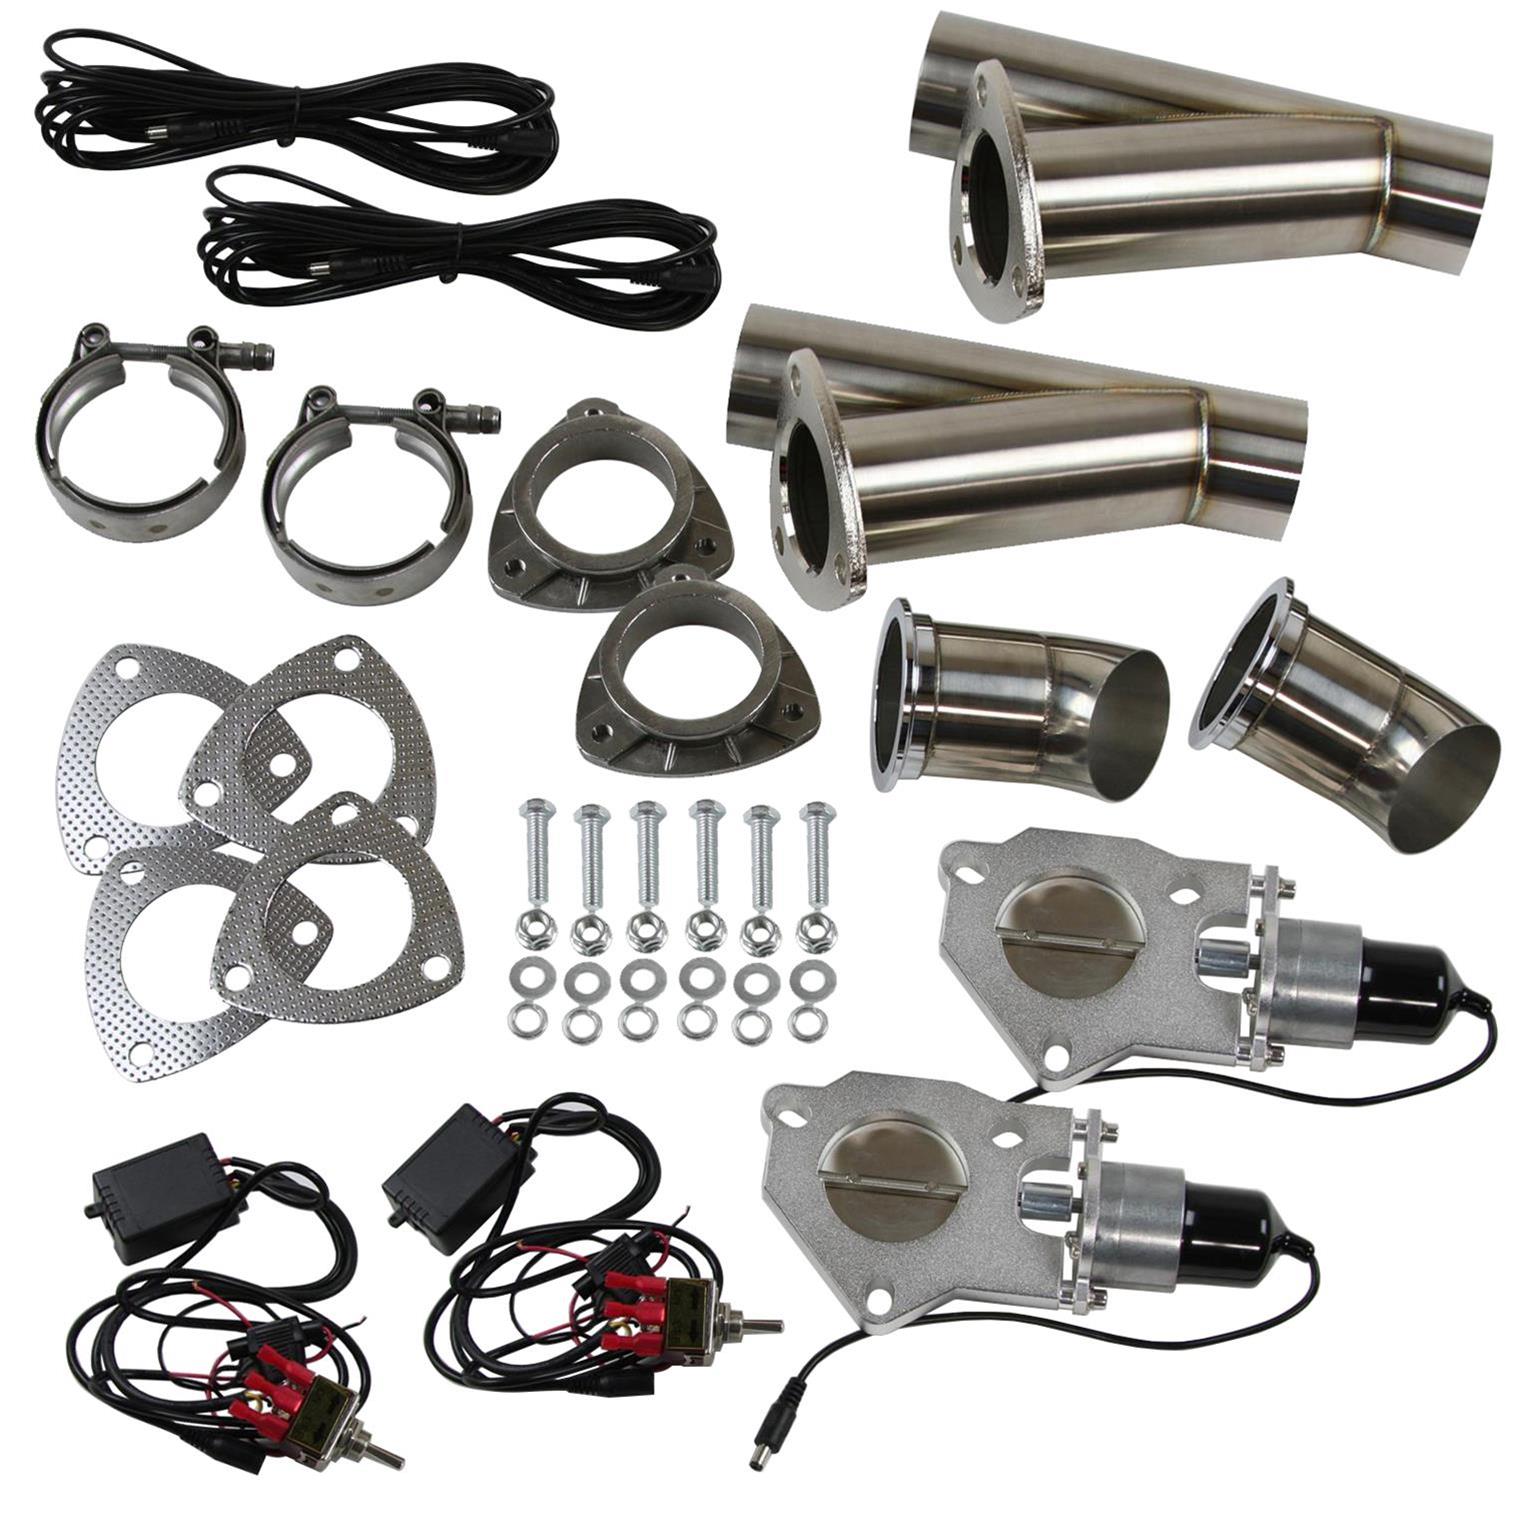 2.5 INCH Electric Exhaust Cutout Valves Electric Exhaust Cutout Full Kits